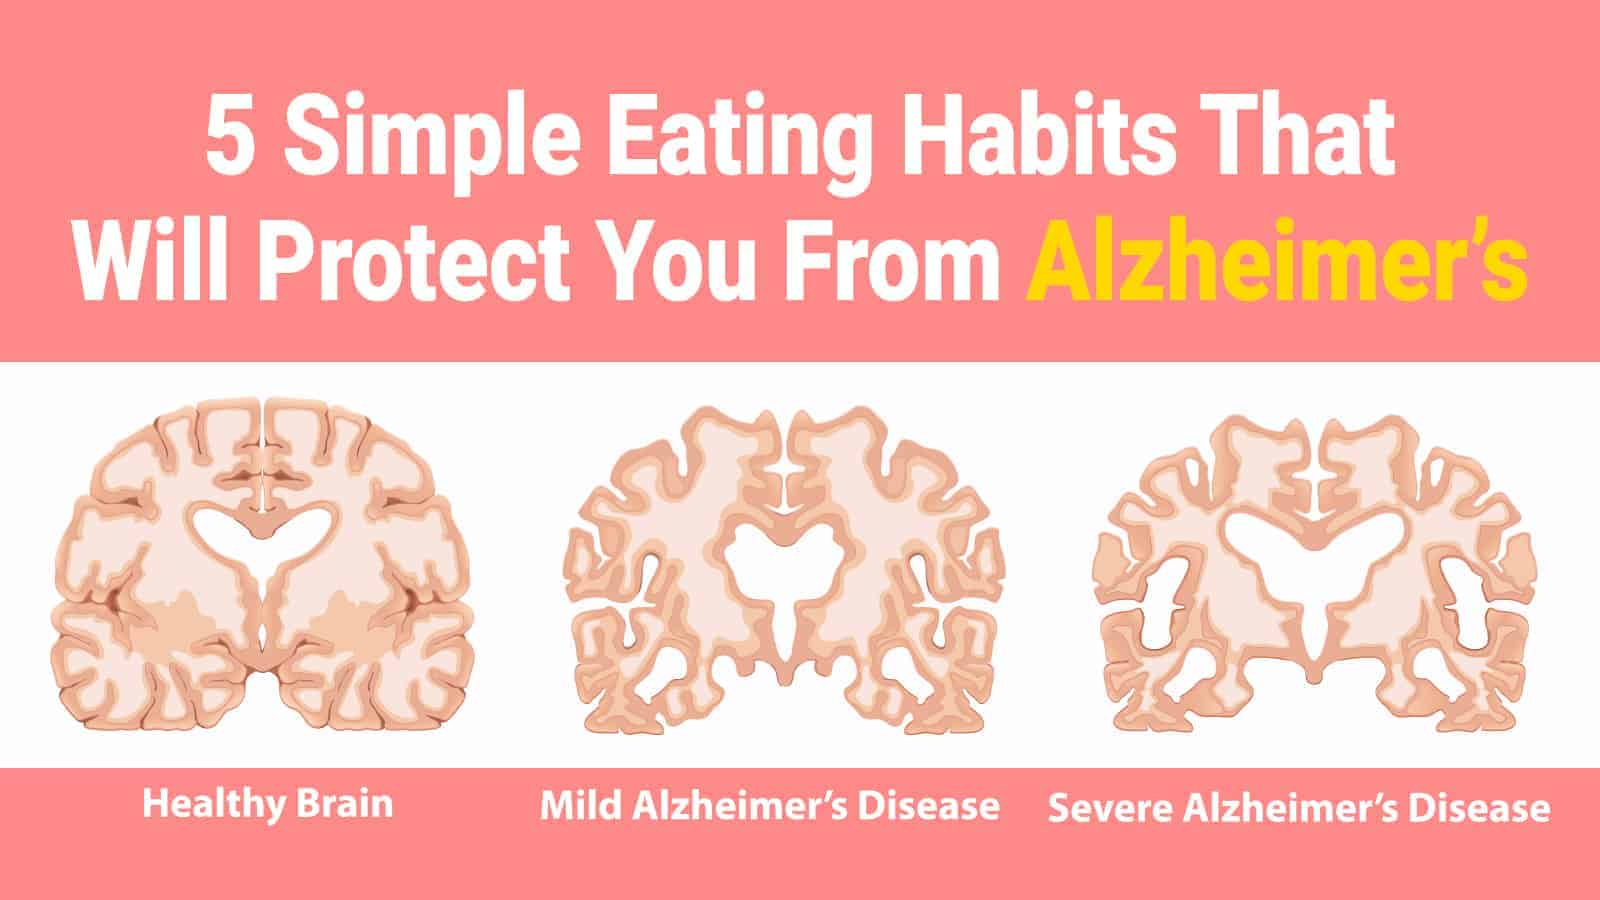 5 Simple Eating Habits That Can Protect You From Alzheimer’s